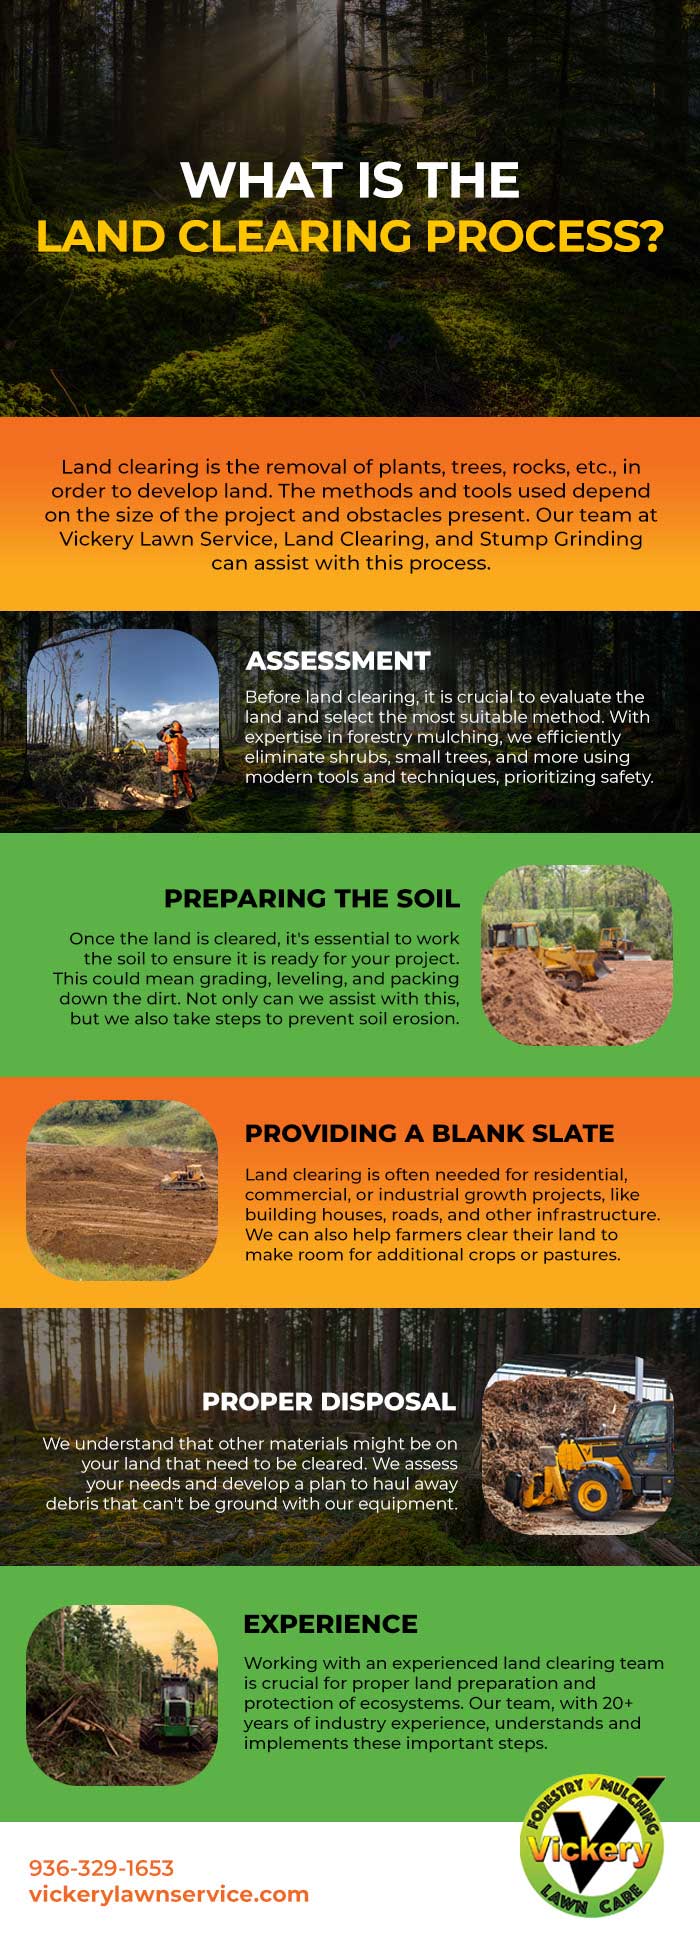 What Is the Land Clearing Process?